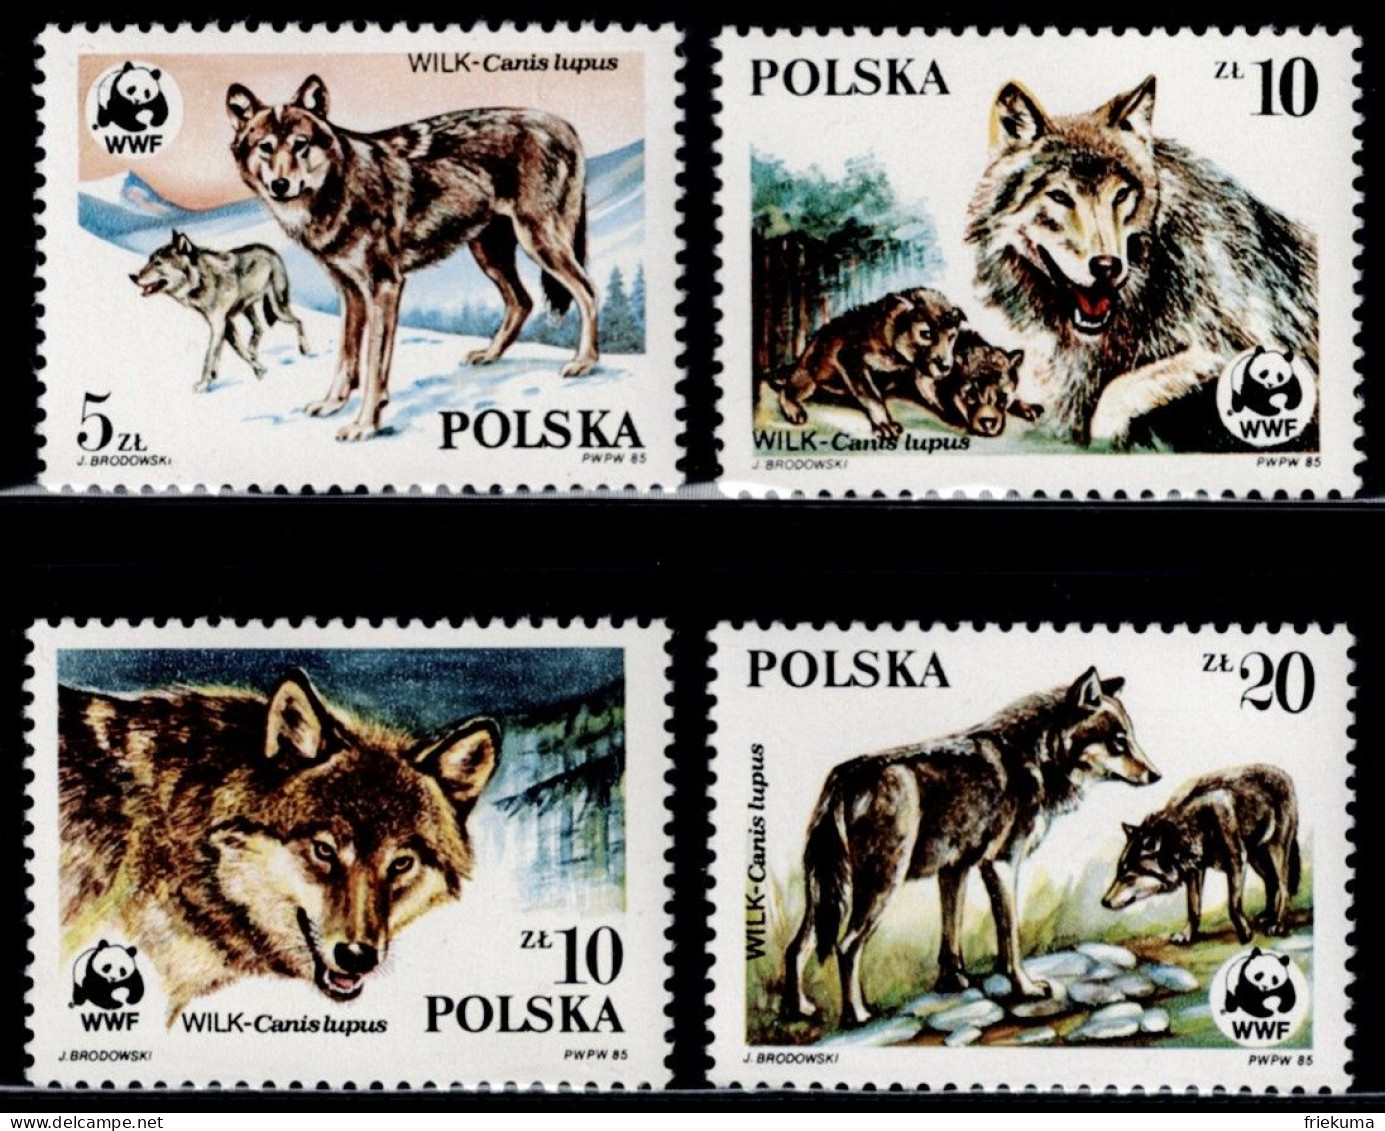 Polska 1985, Wolf: Wolves In Winter And Summer, She-wolf With Pups, Wolf (Canis Lupus), MiNr. 2975-2978 - Dogs